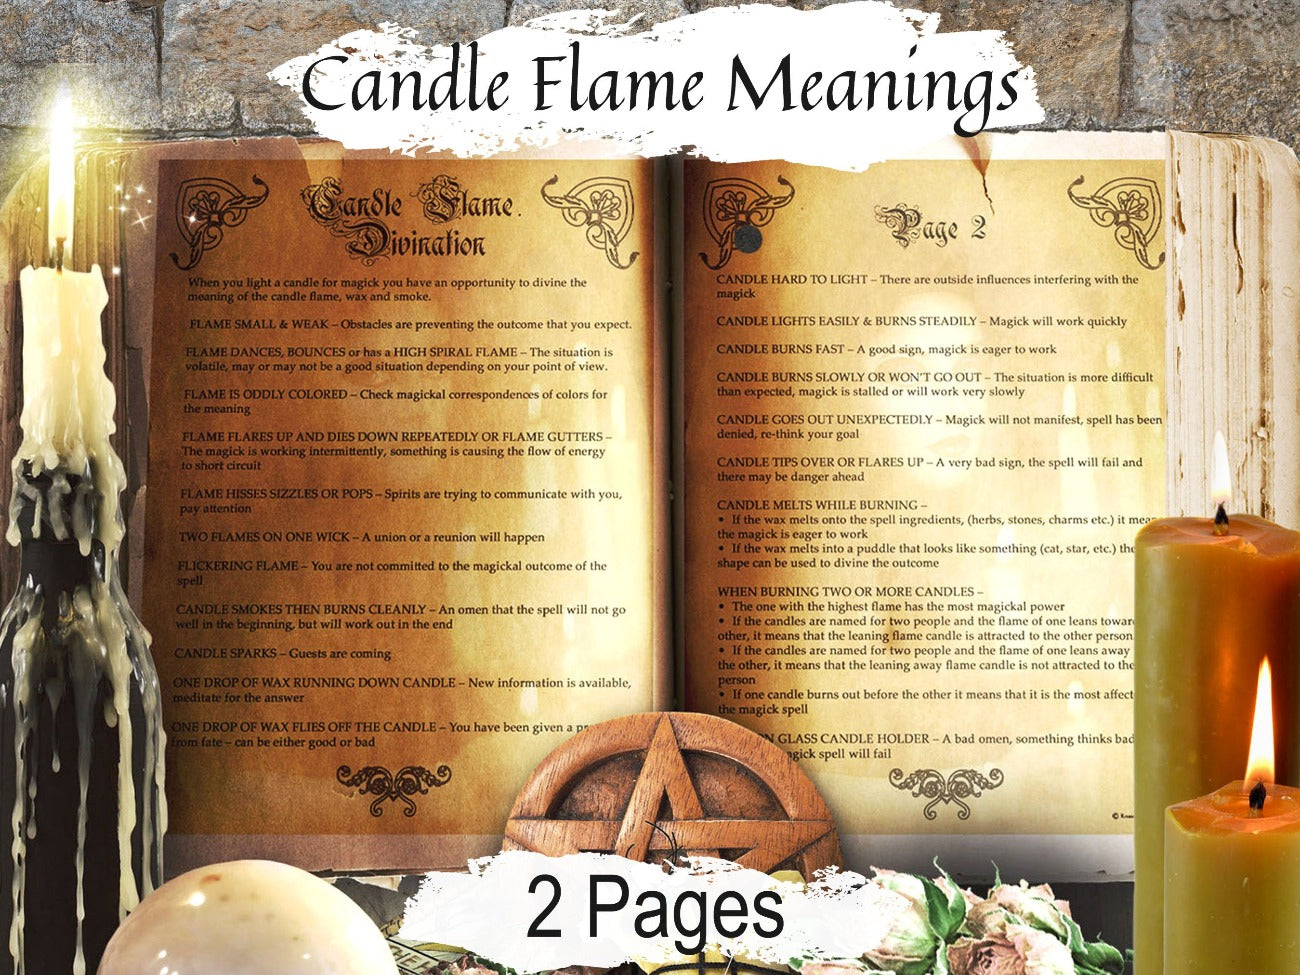 CANDLE FLAME DIVINATION 2 Pages, Witchcraft Candle Burning, Guttering Flickering Candle Flame Meaning, Wicca Candle Magic Dancing Fire Signs - Morgana Magick Spell